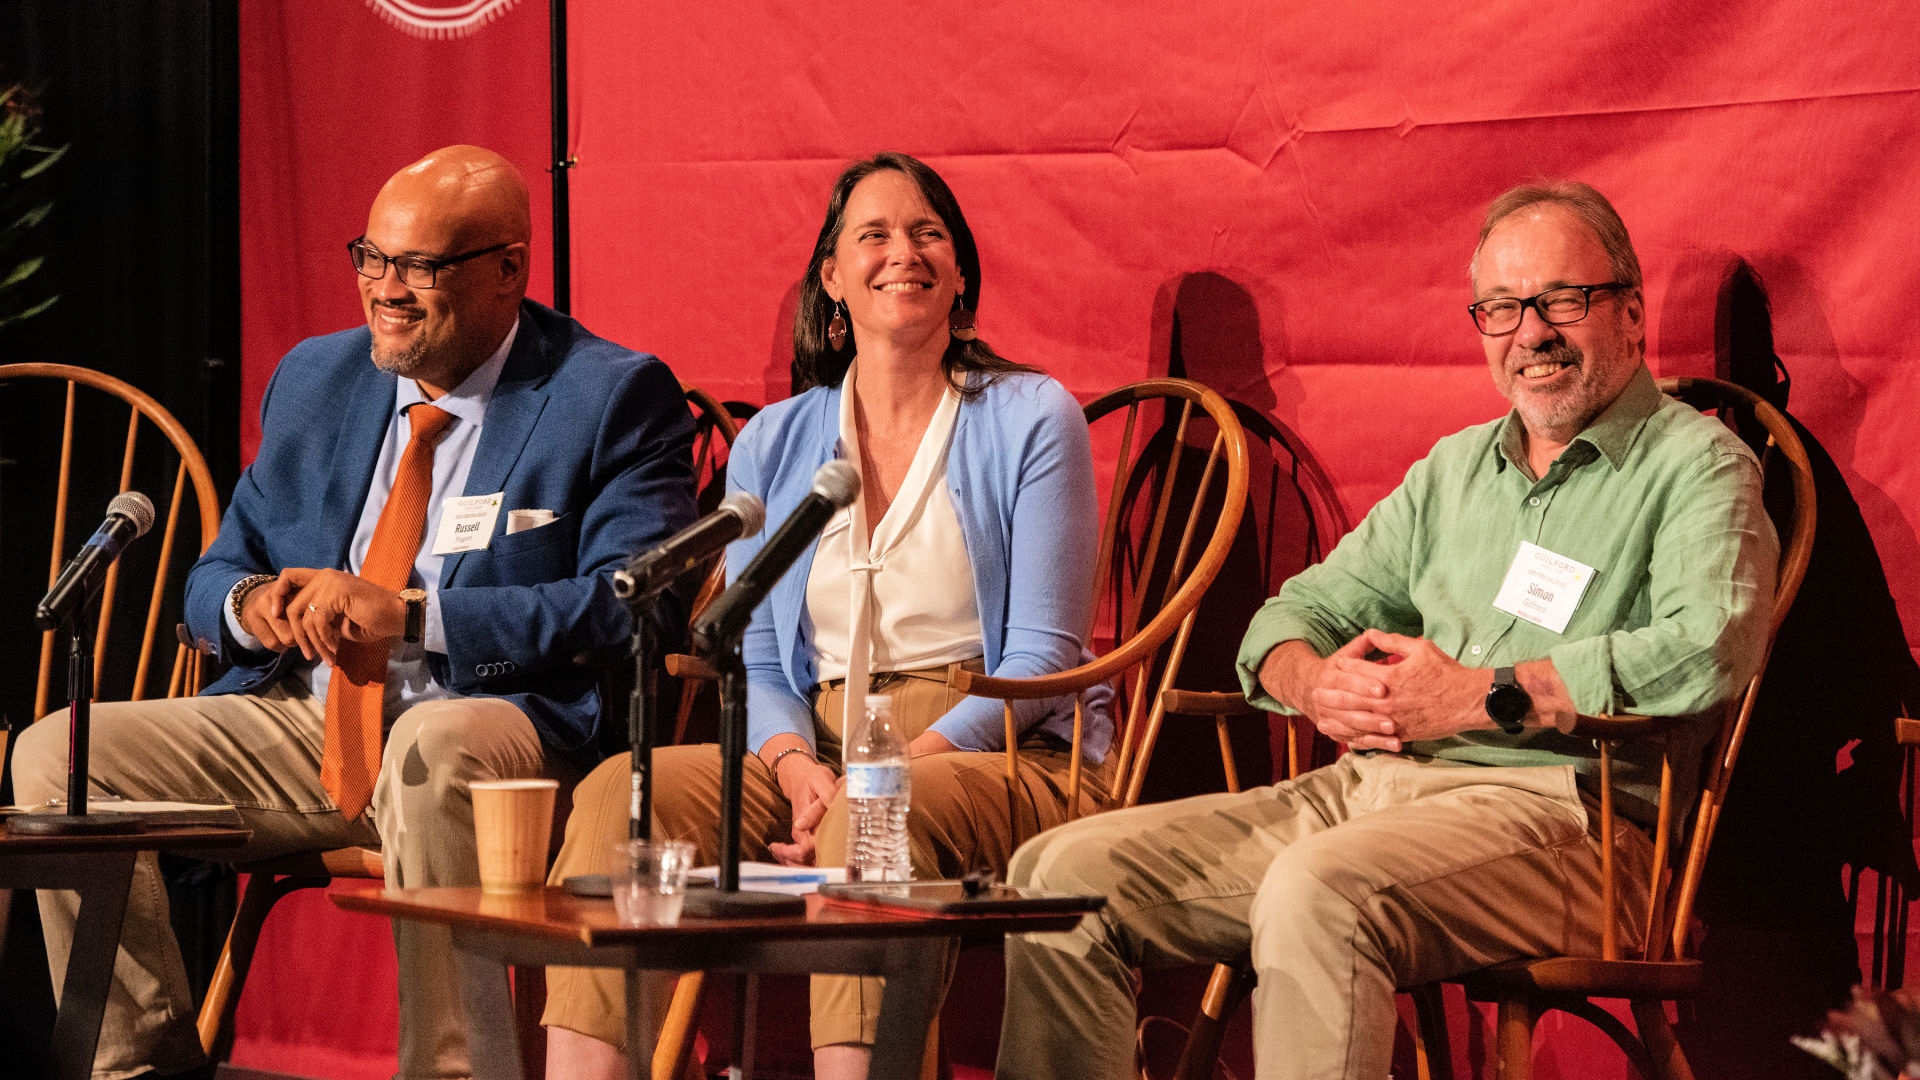 Seated on stage at the Guilford Dialogues are, from left: Russell Fugett, Wendy Bolger, and Simon Gifford.